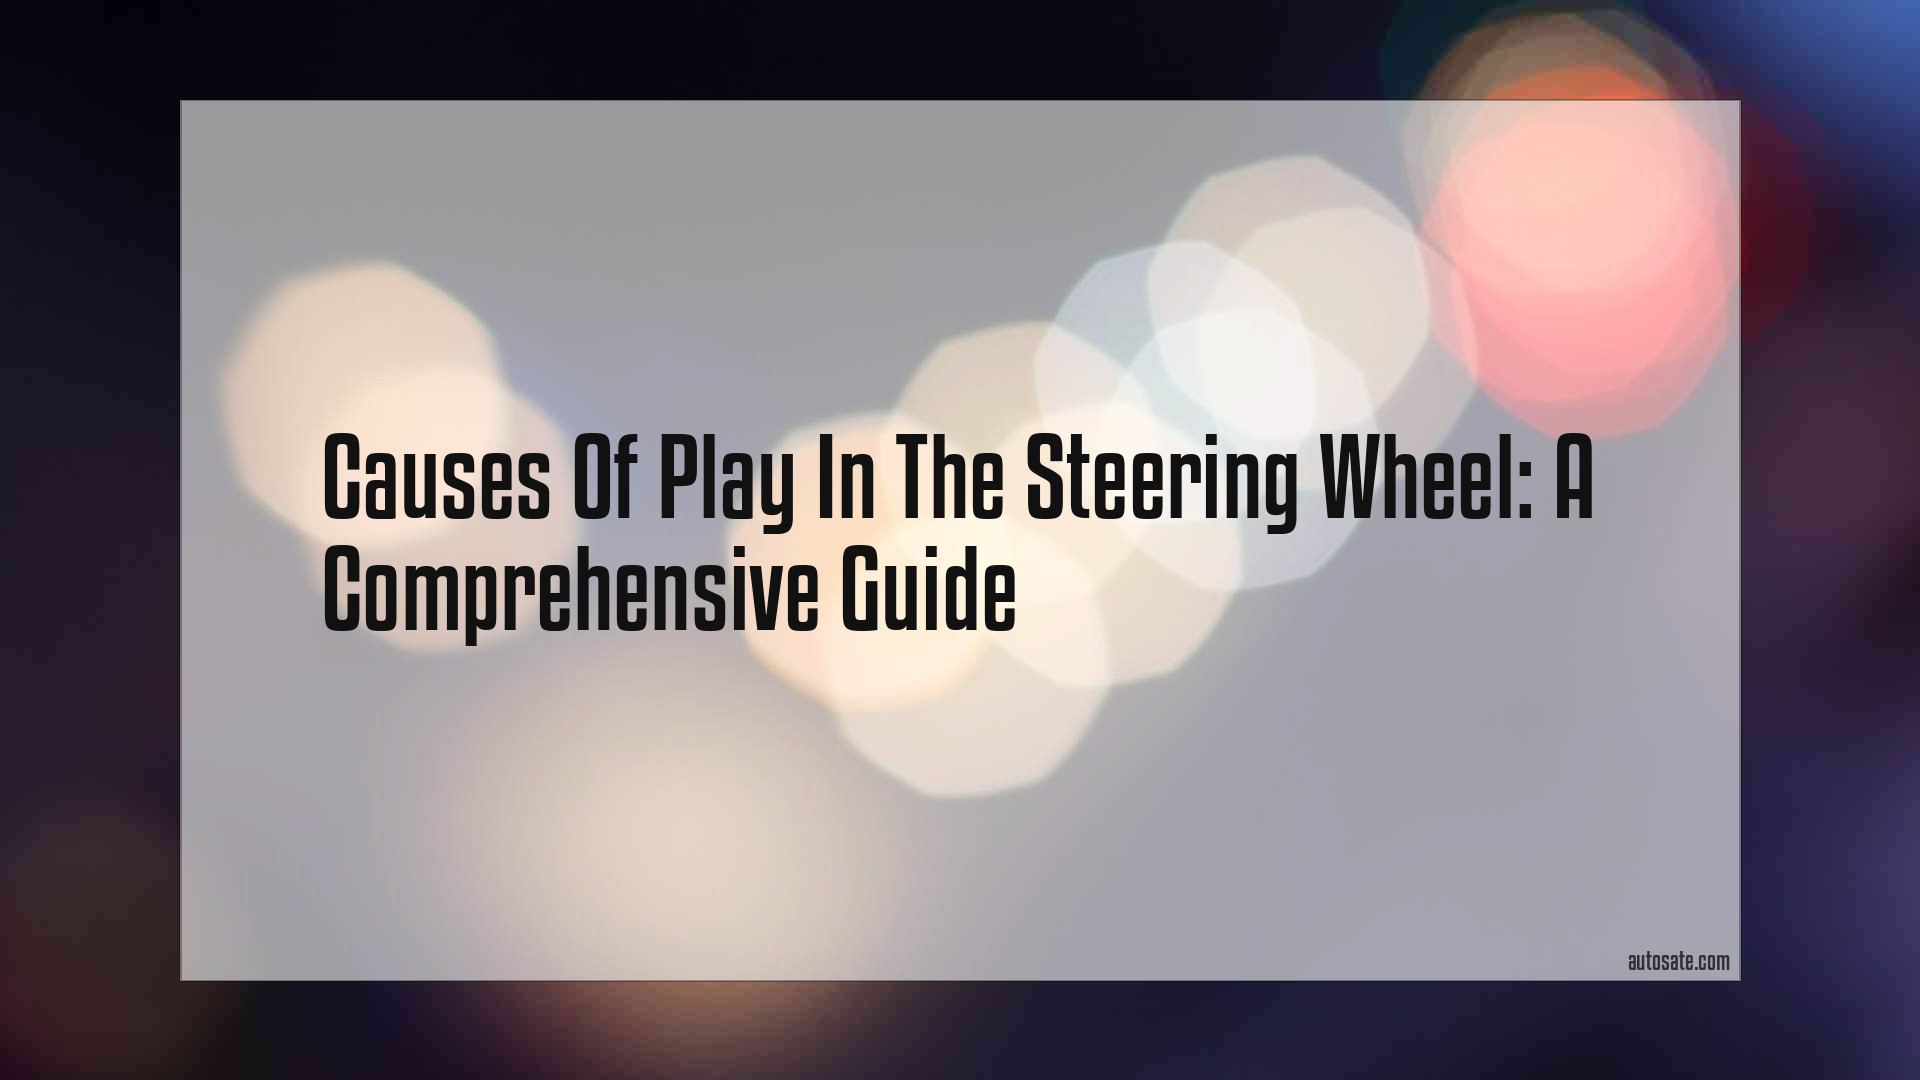 Causes Of Play In The Steering Wheel: A Comprehensive Guide